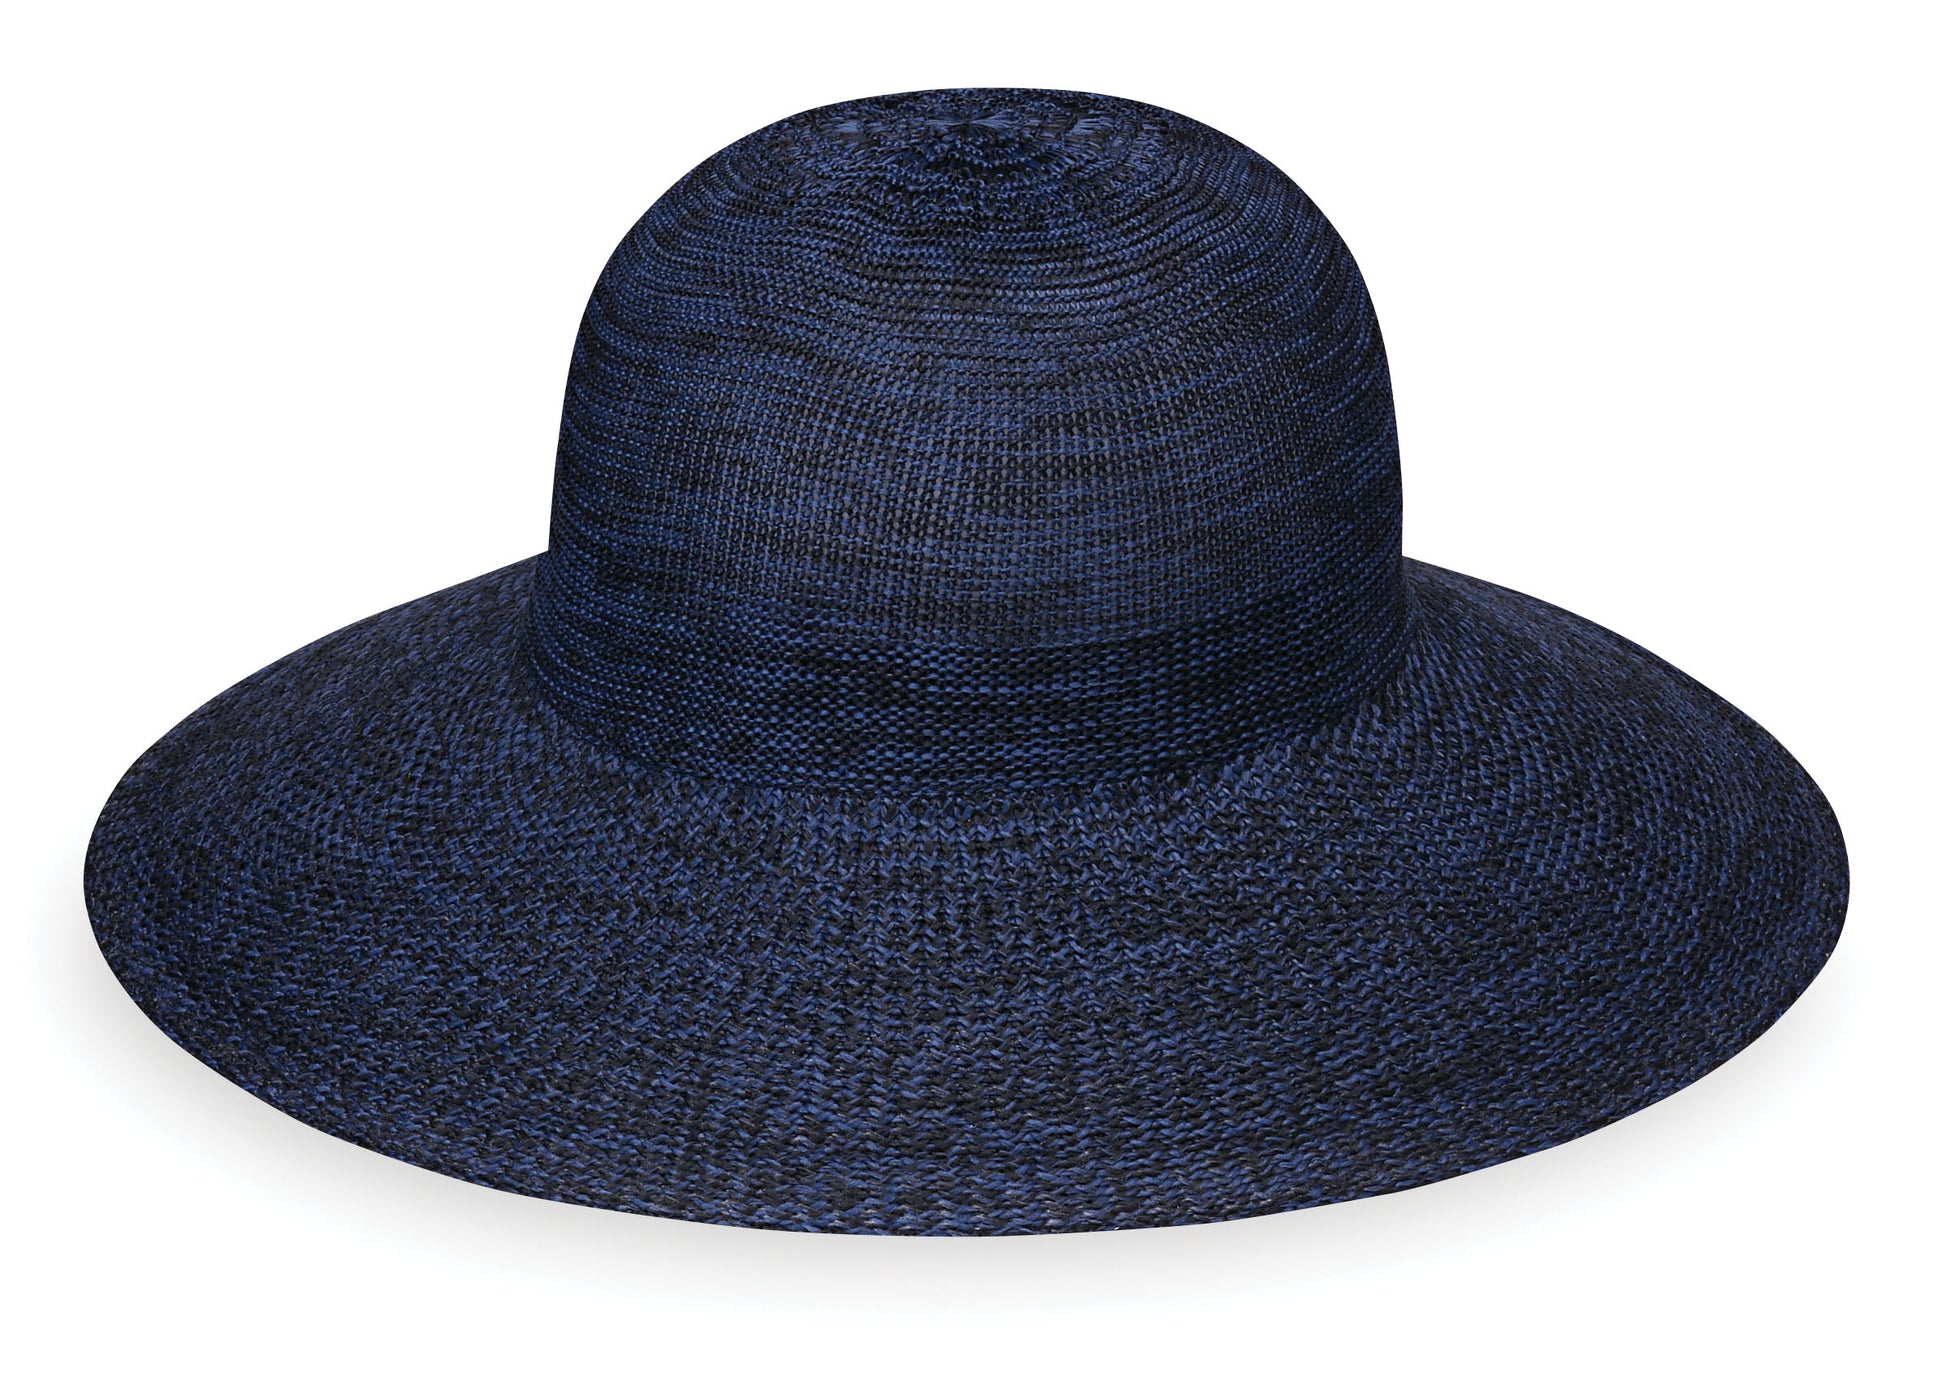 This packable blue beach hat not only offers UPF 50+ sun protection but is also recommended by the Skin Cancer Foundation. Its wide brim ensures stylish sun coverage, making it a travel-friendly and fashionable addition to your personal fashion collection.